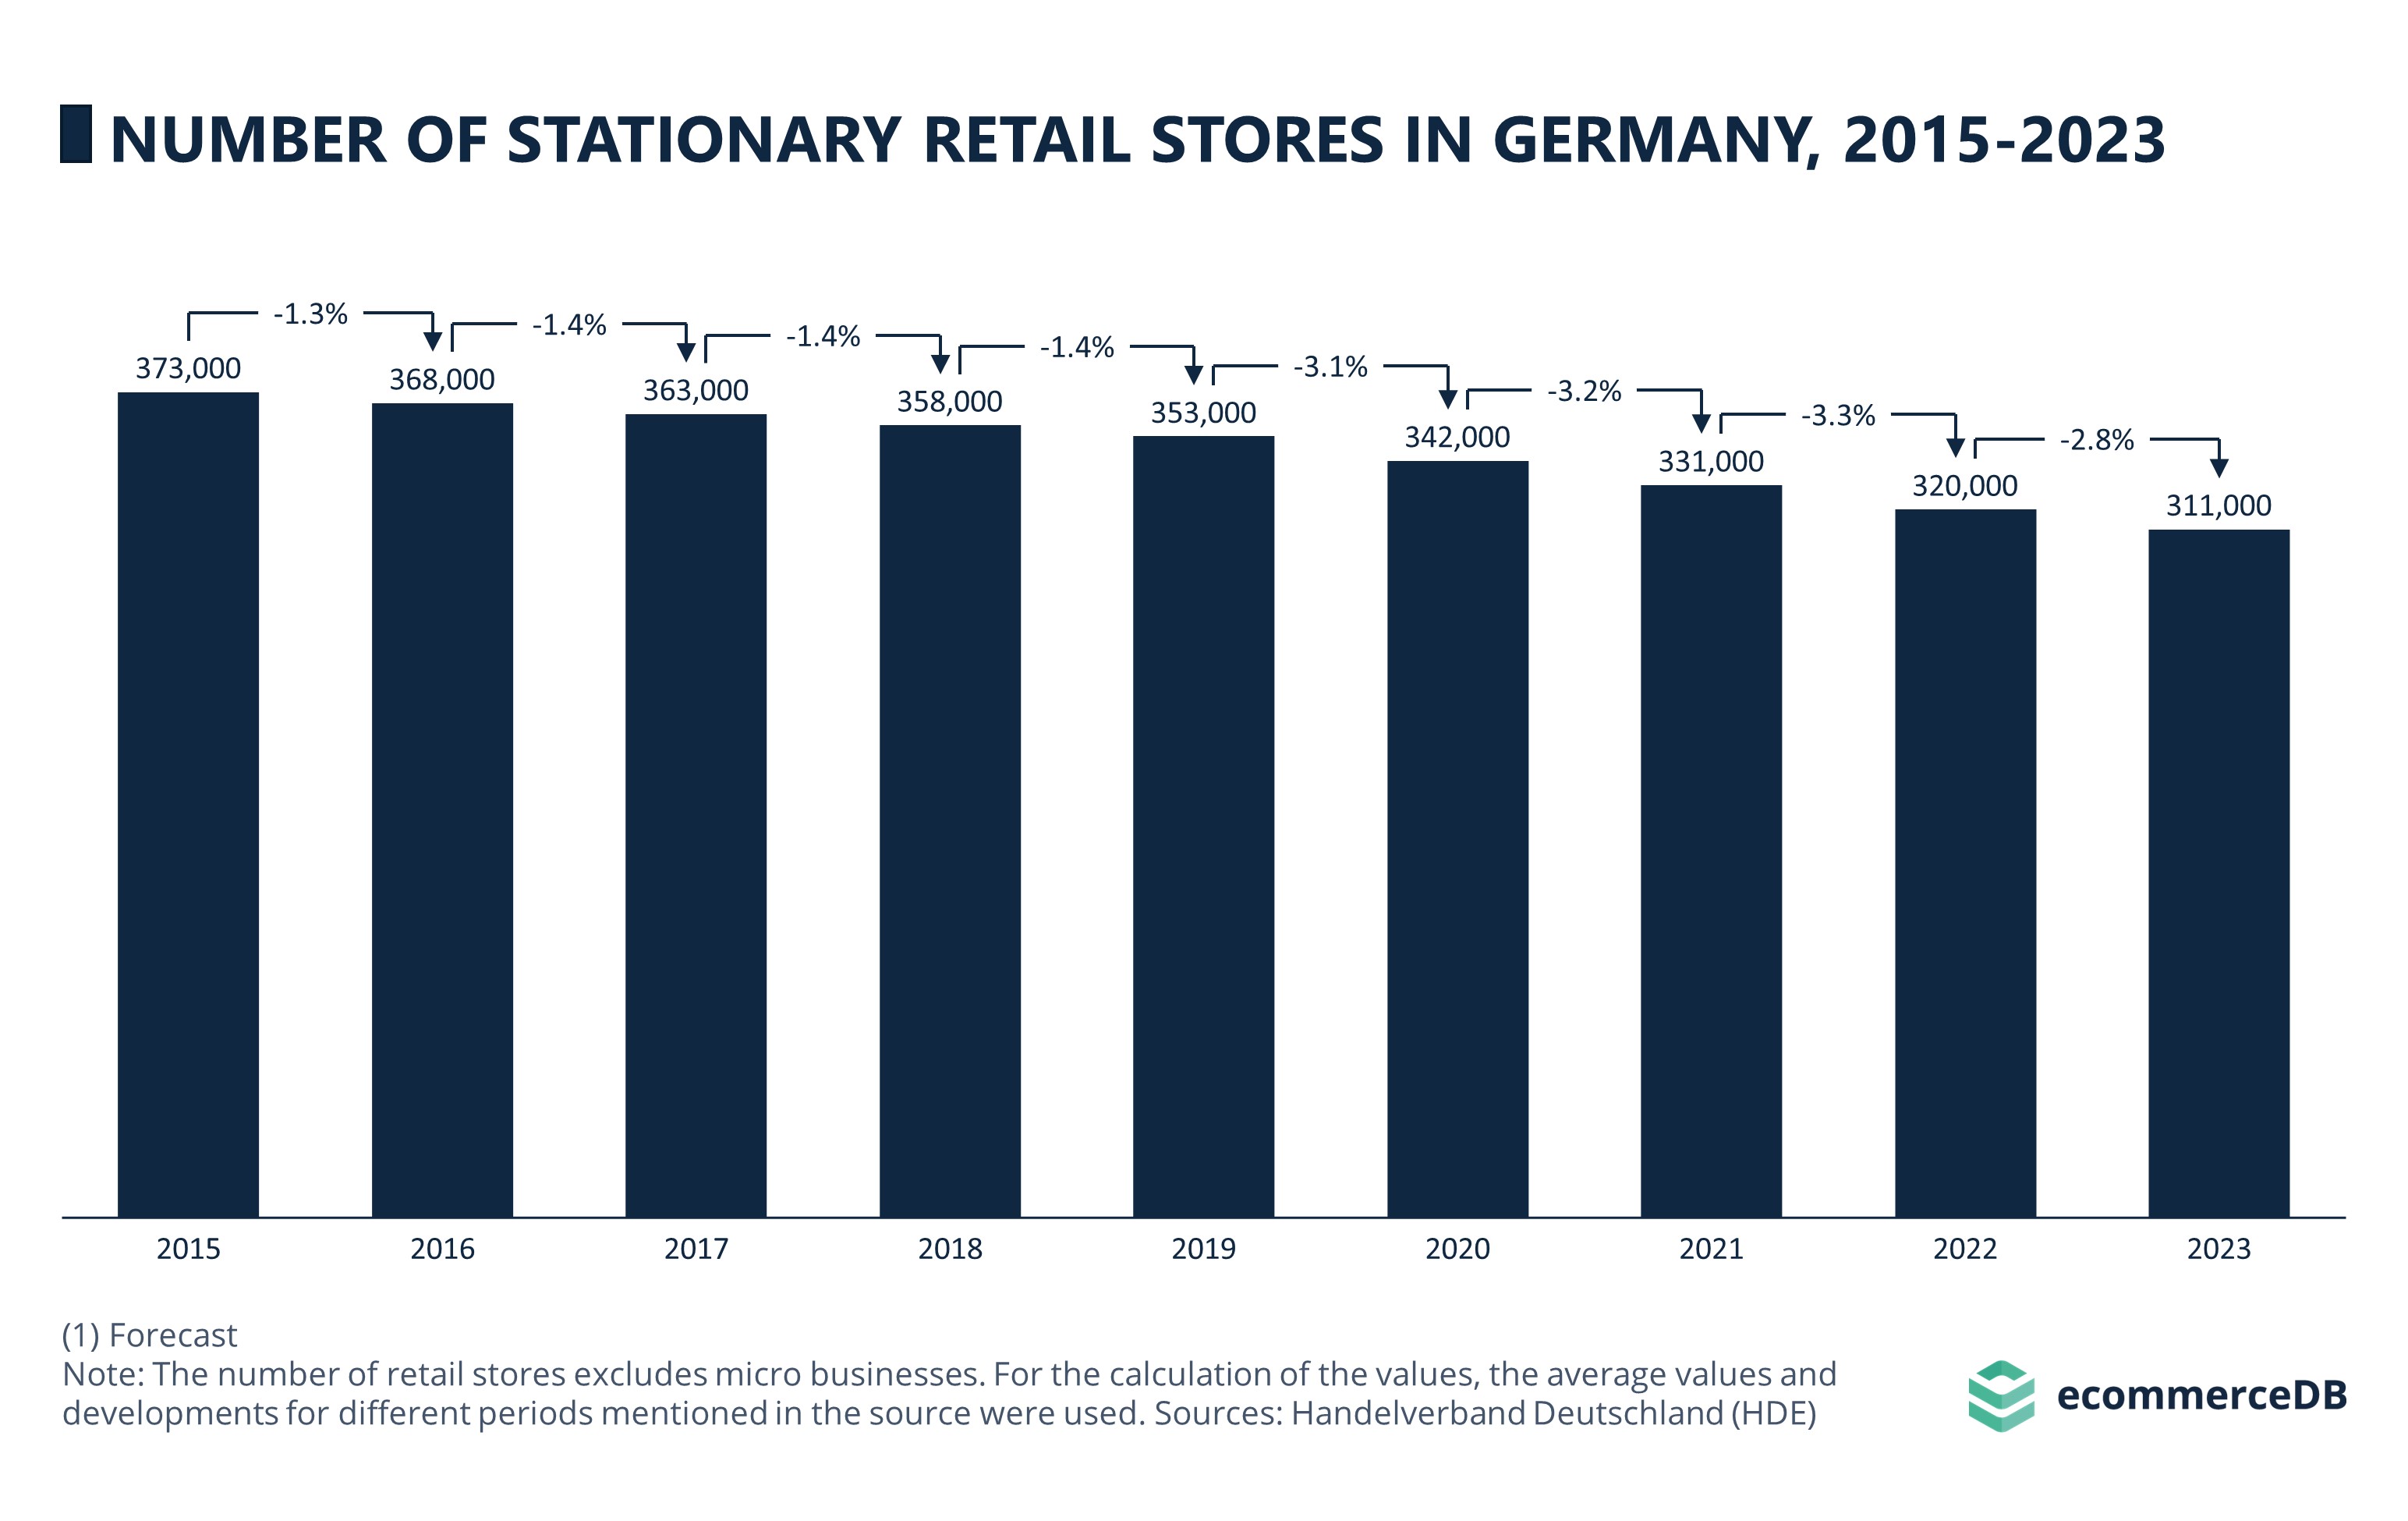 Number of Stationary Retail Stores in Germany, 2015-2023